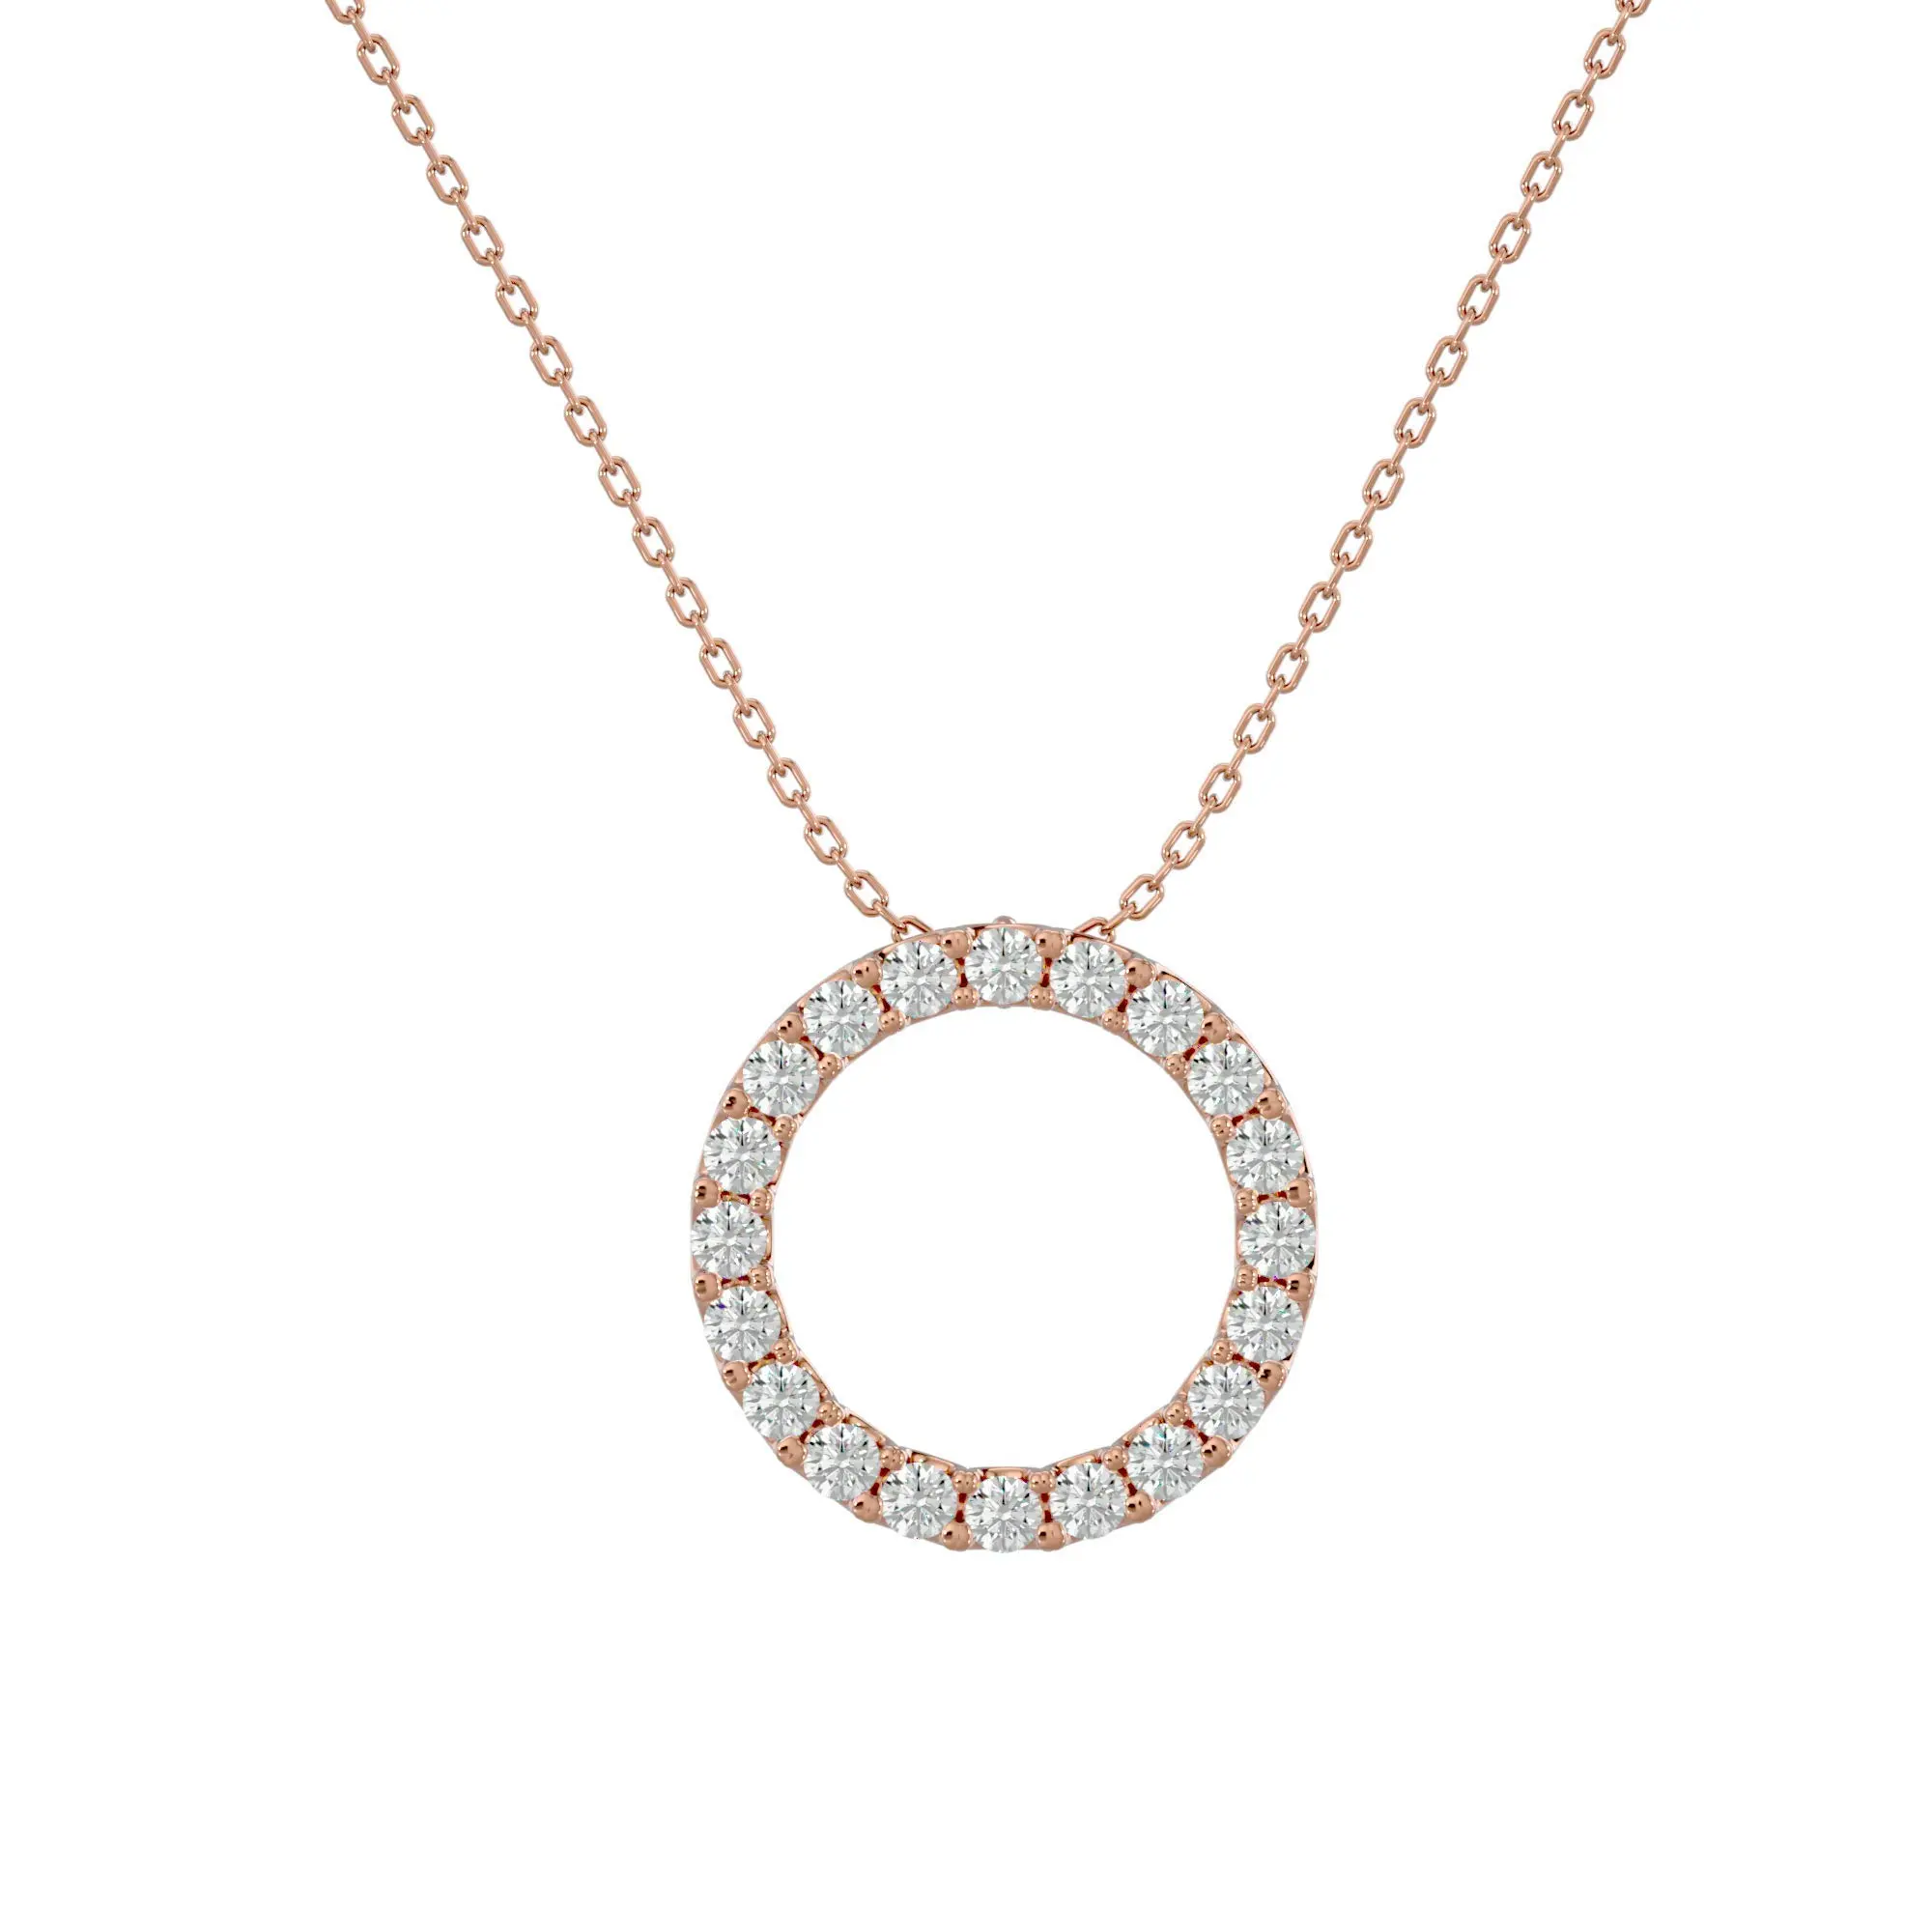 Diamond Pendant with 1.64ct Round Natural Diamond in 18K White/ Yellow/ Rose Gold Circle Pendant Necklace for Women, Wife